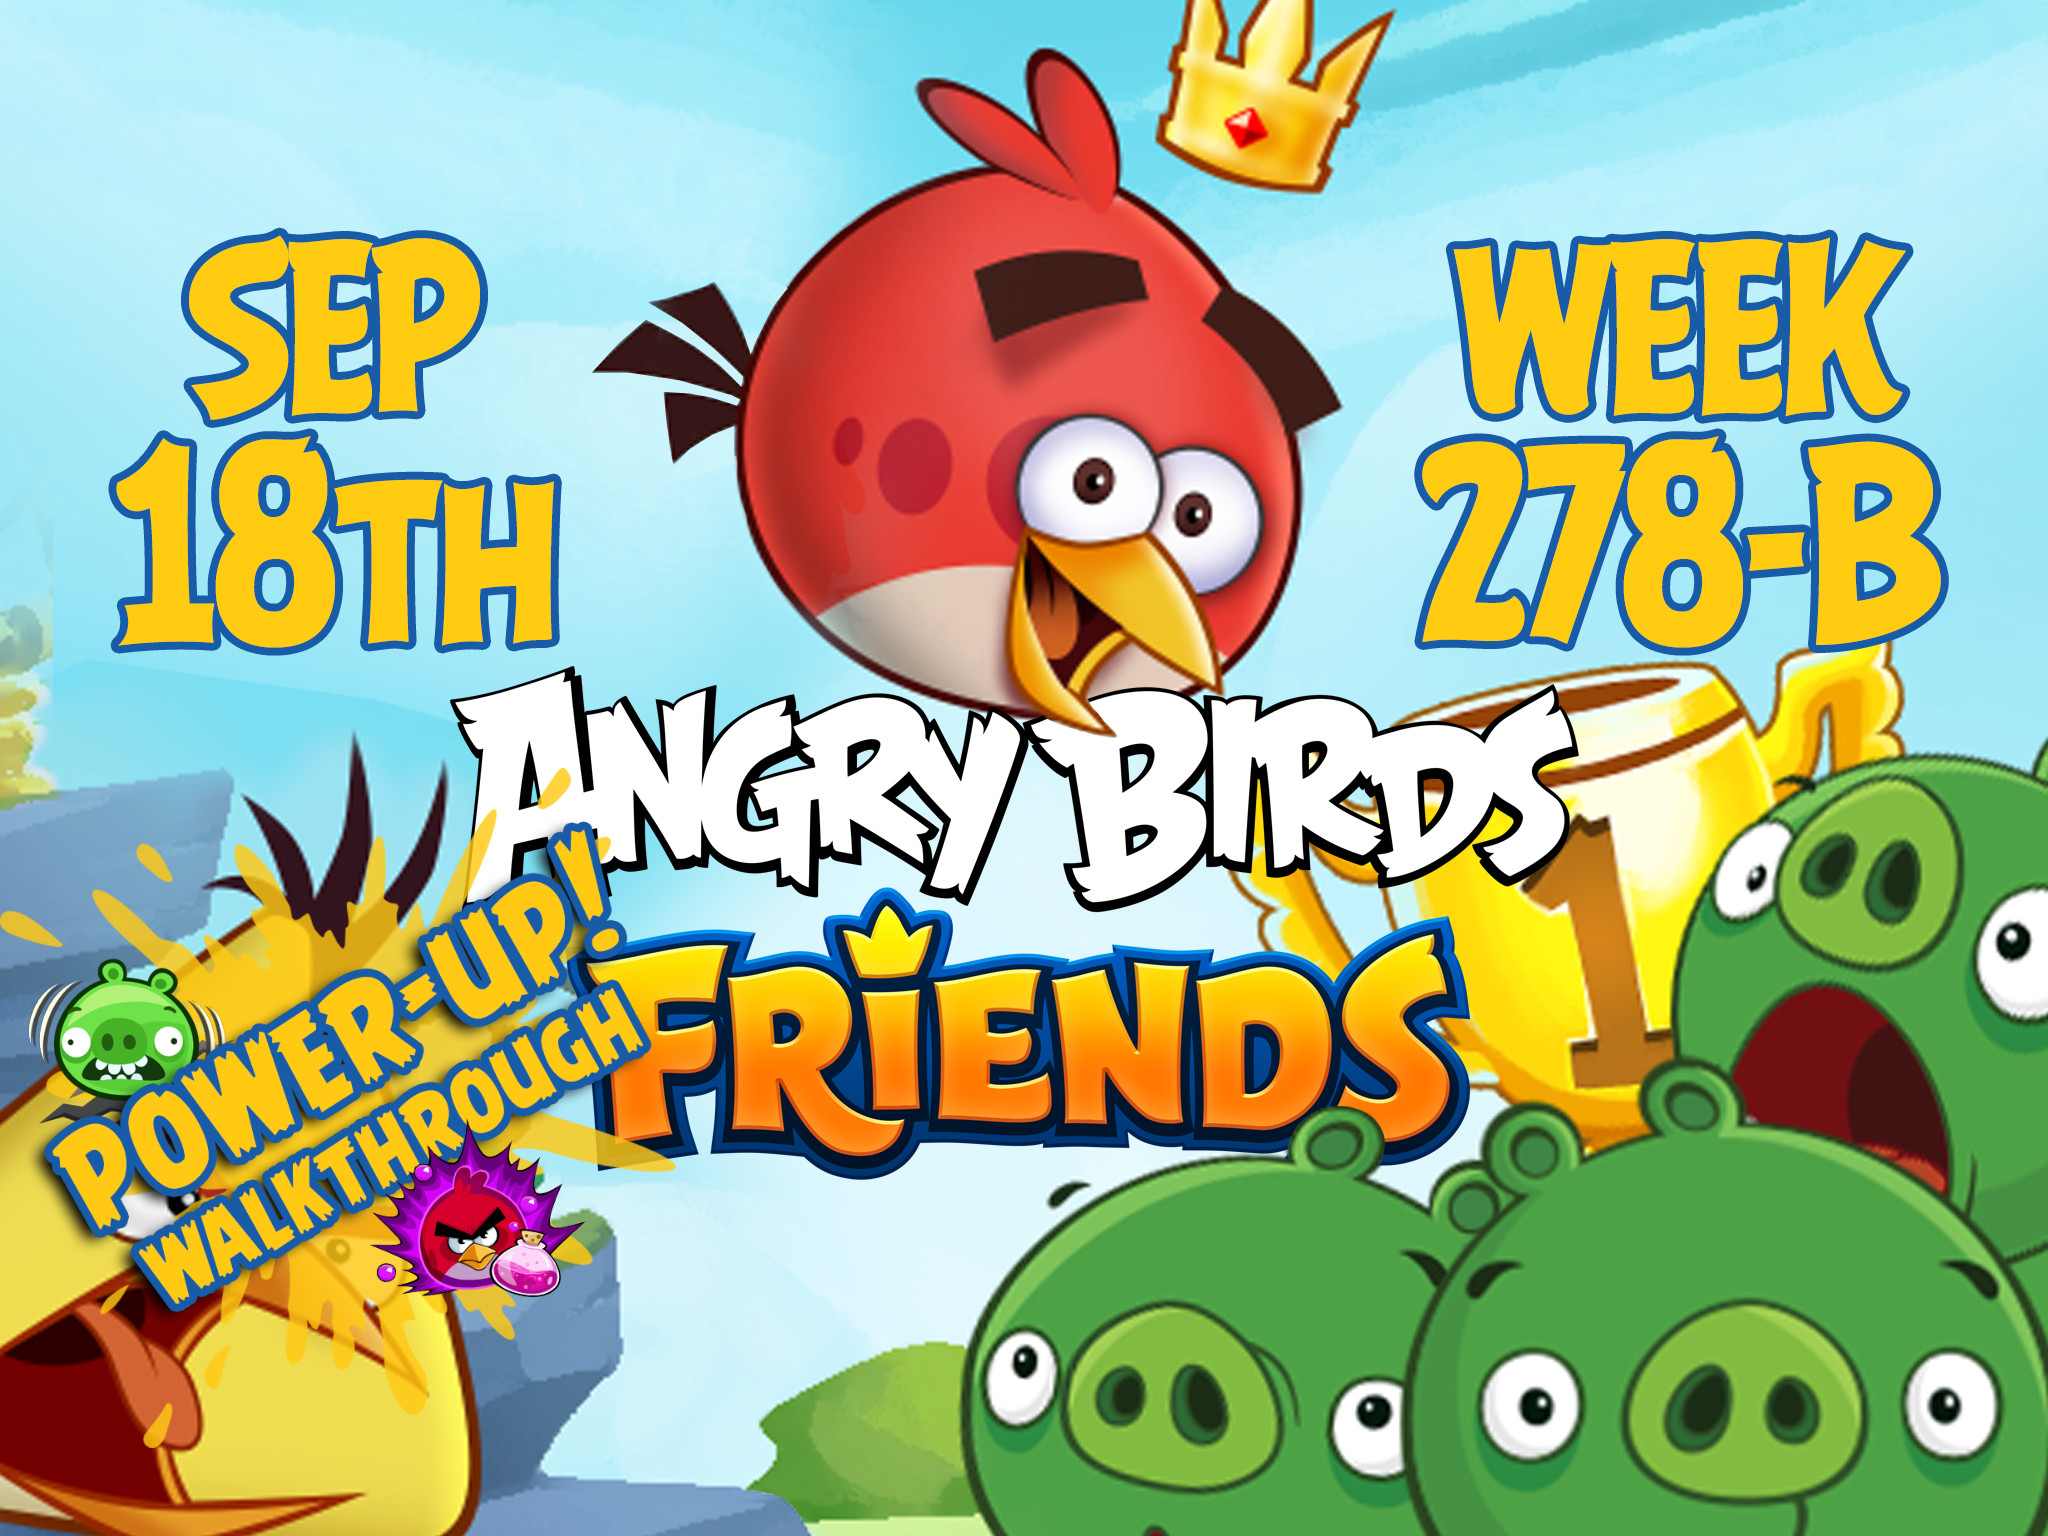 Angry Birds Friends Tournament Week 278-B Feature Image PU